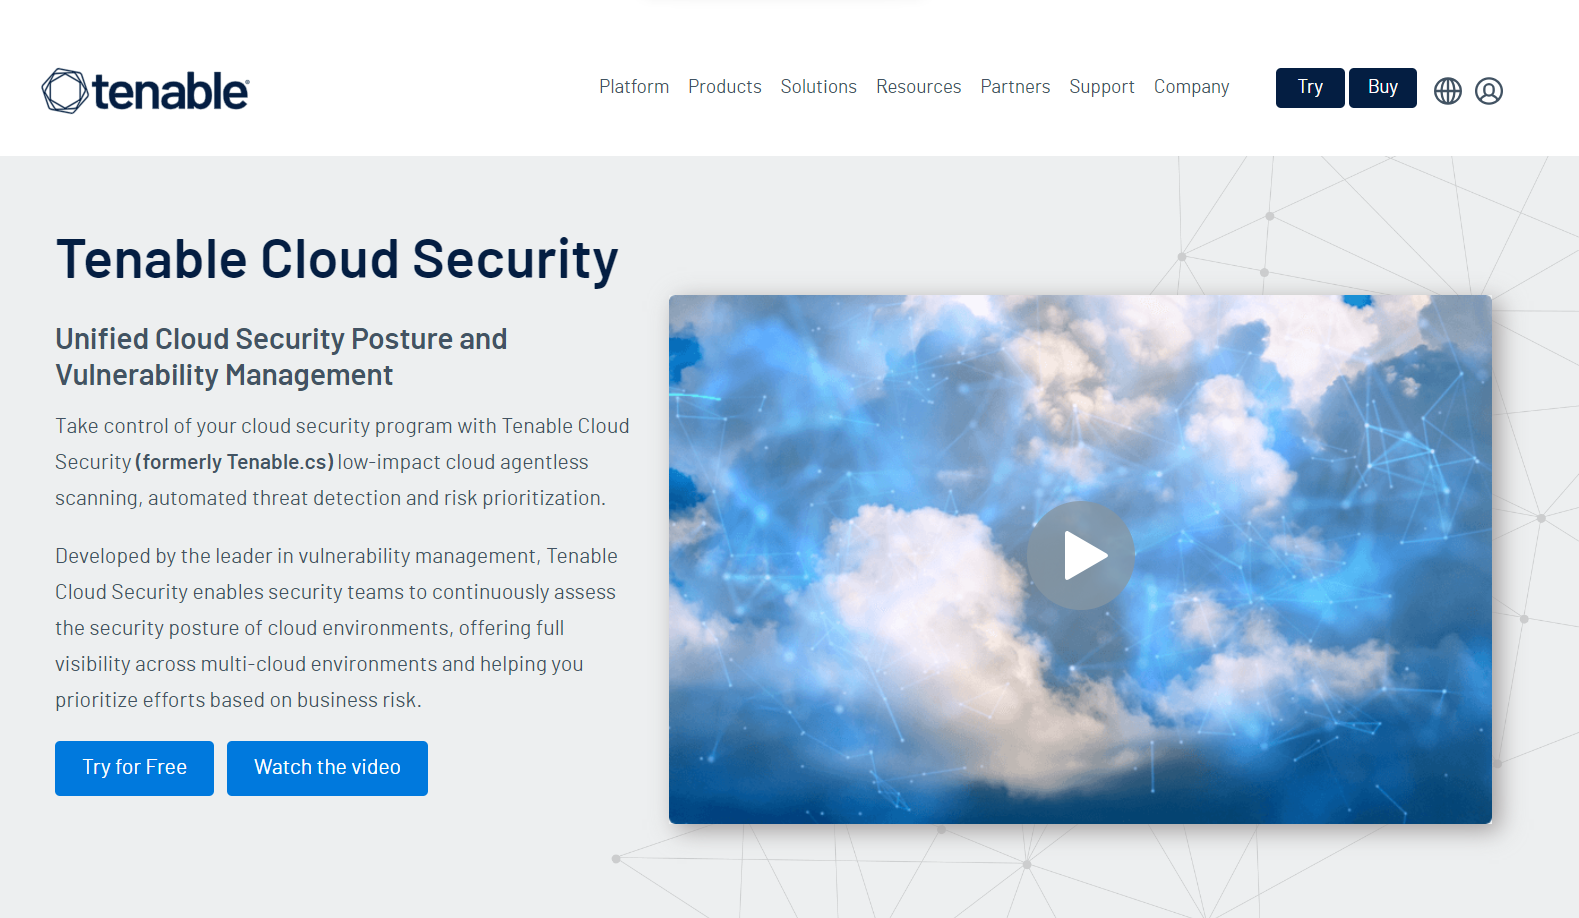 Tenable Cloud Security (Nessus)